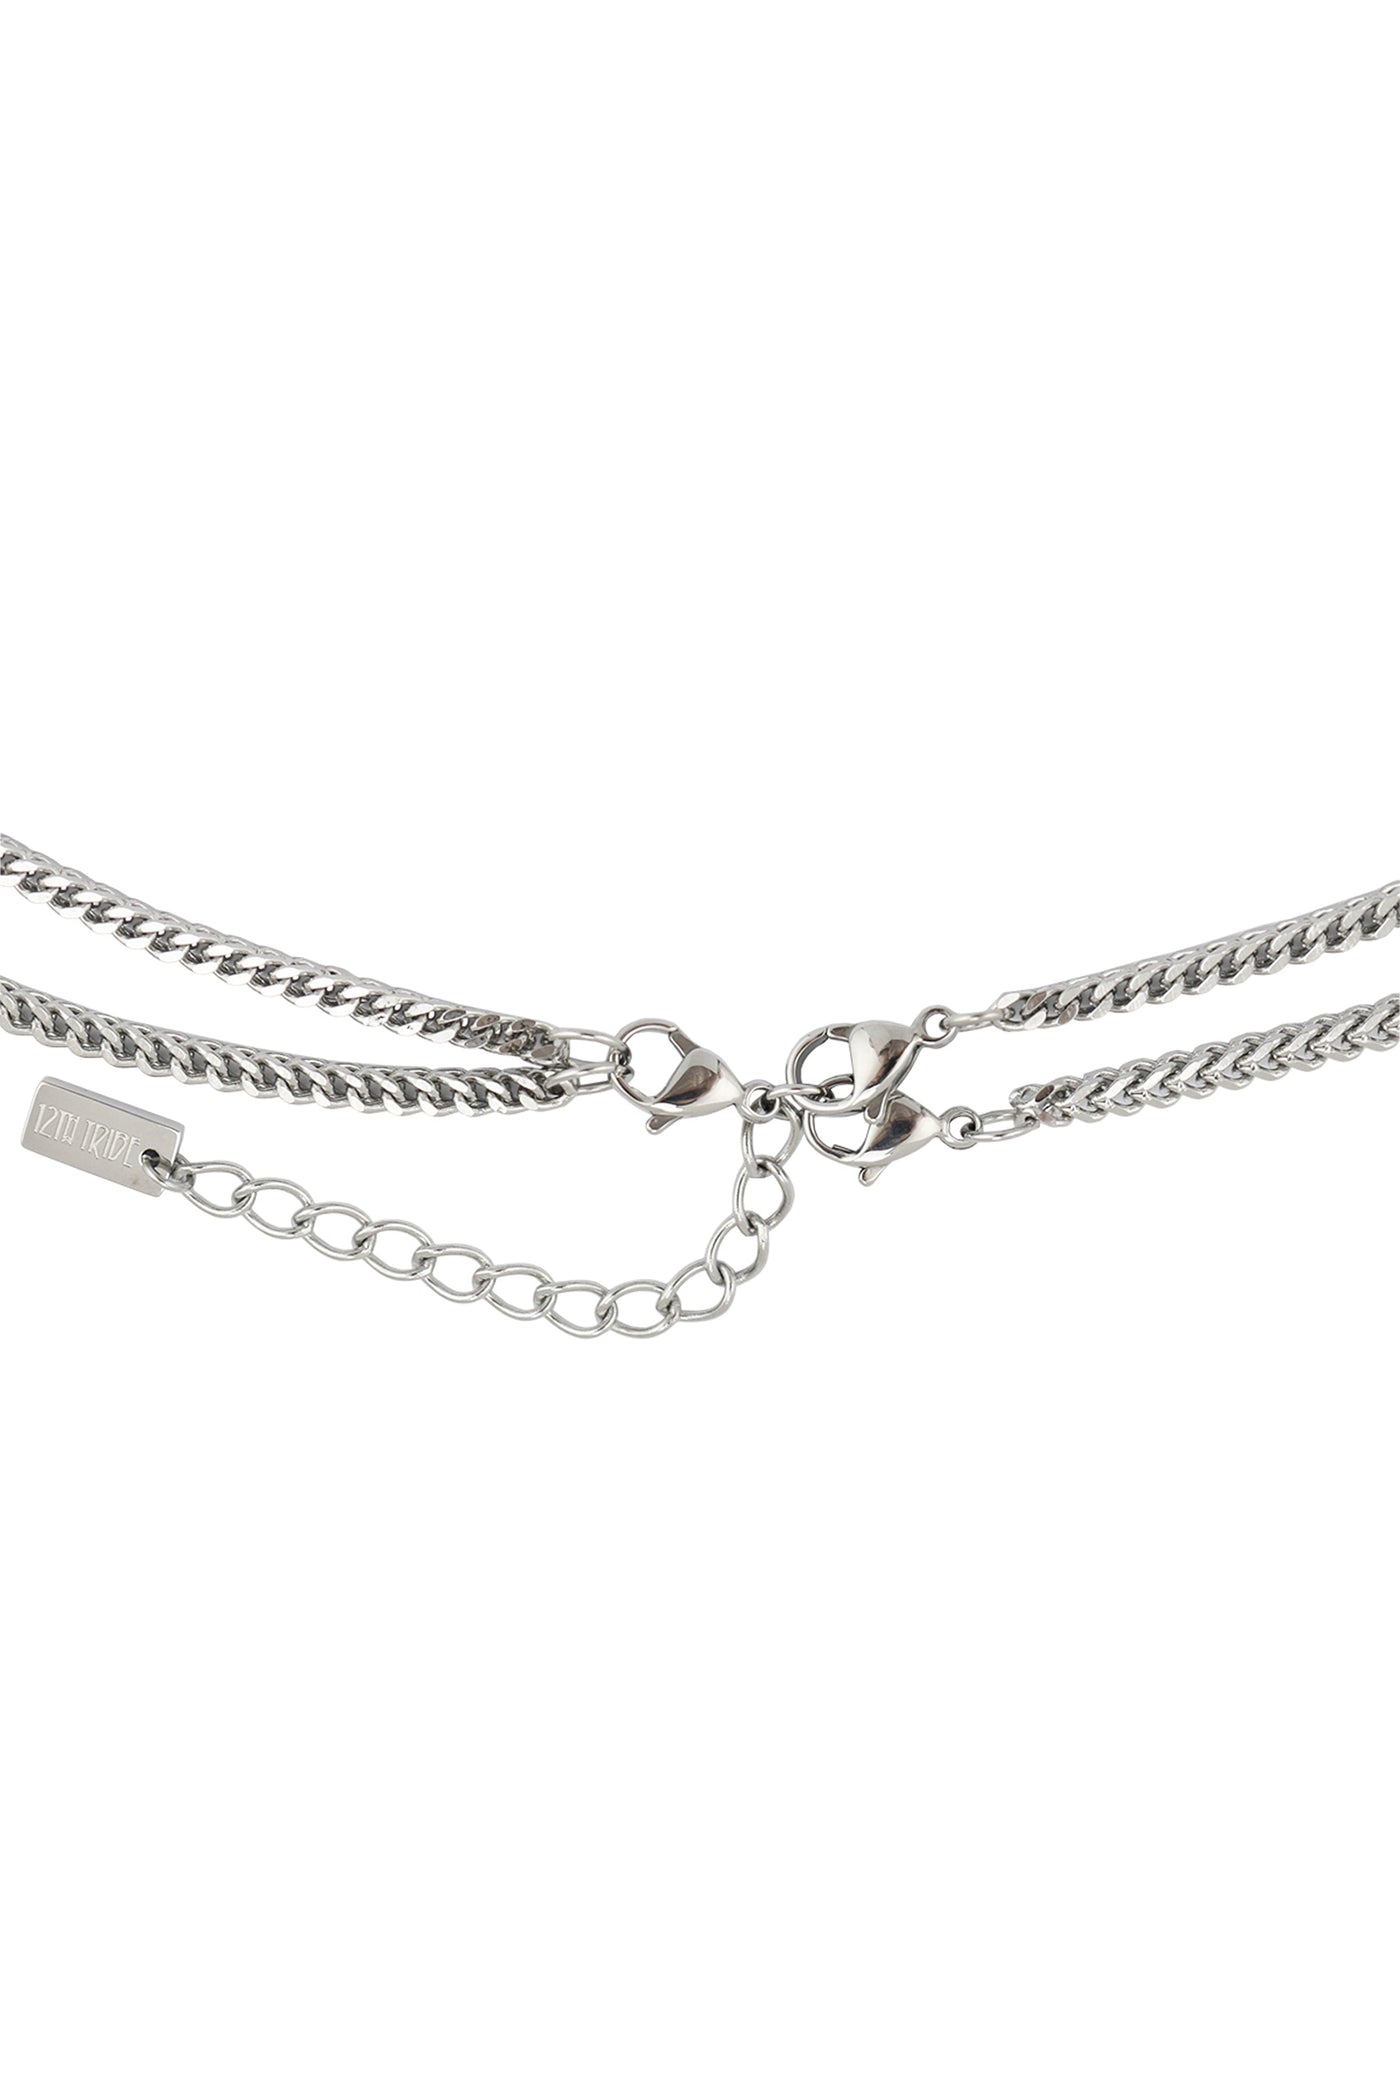 Michael Jake Silver Chain Necklace